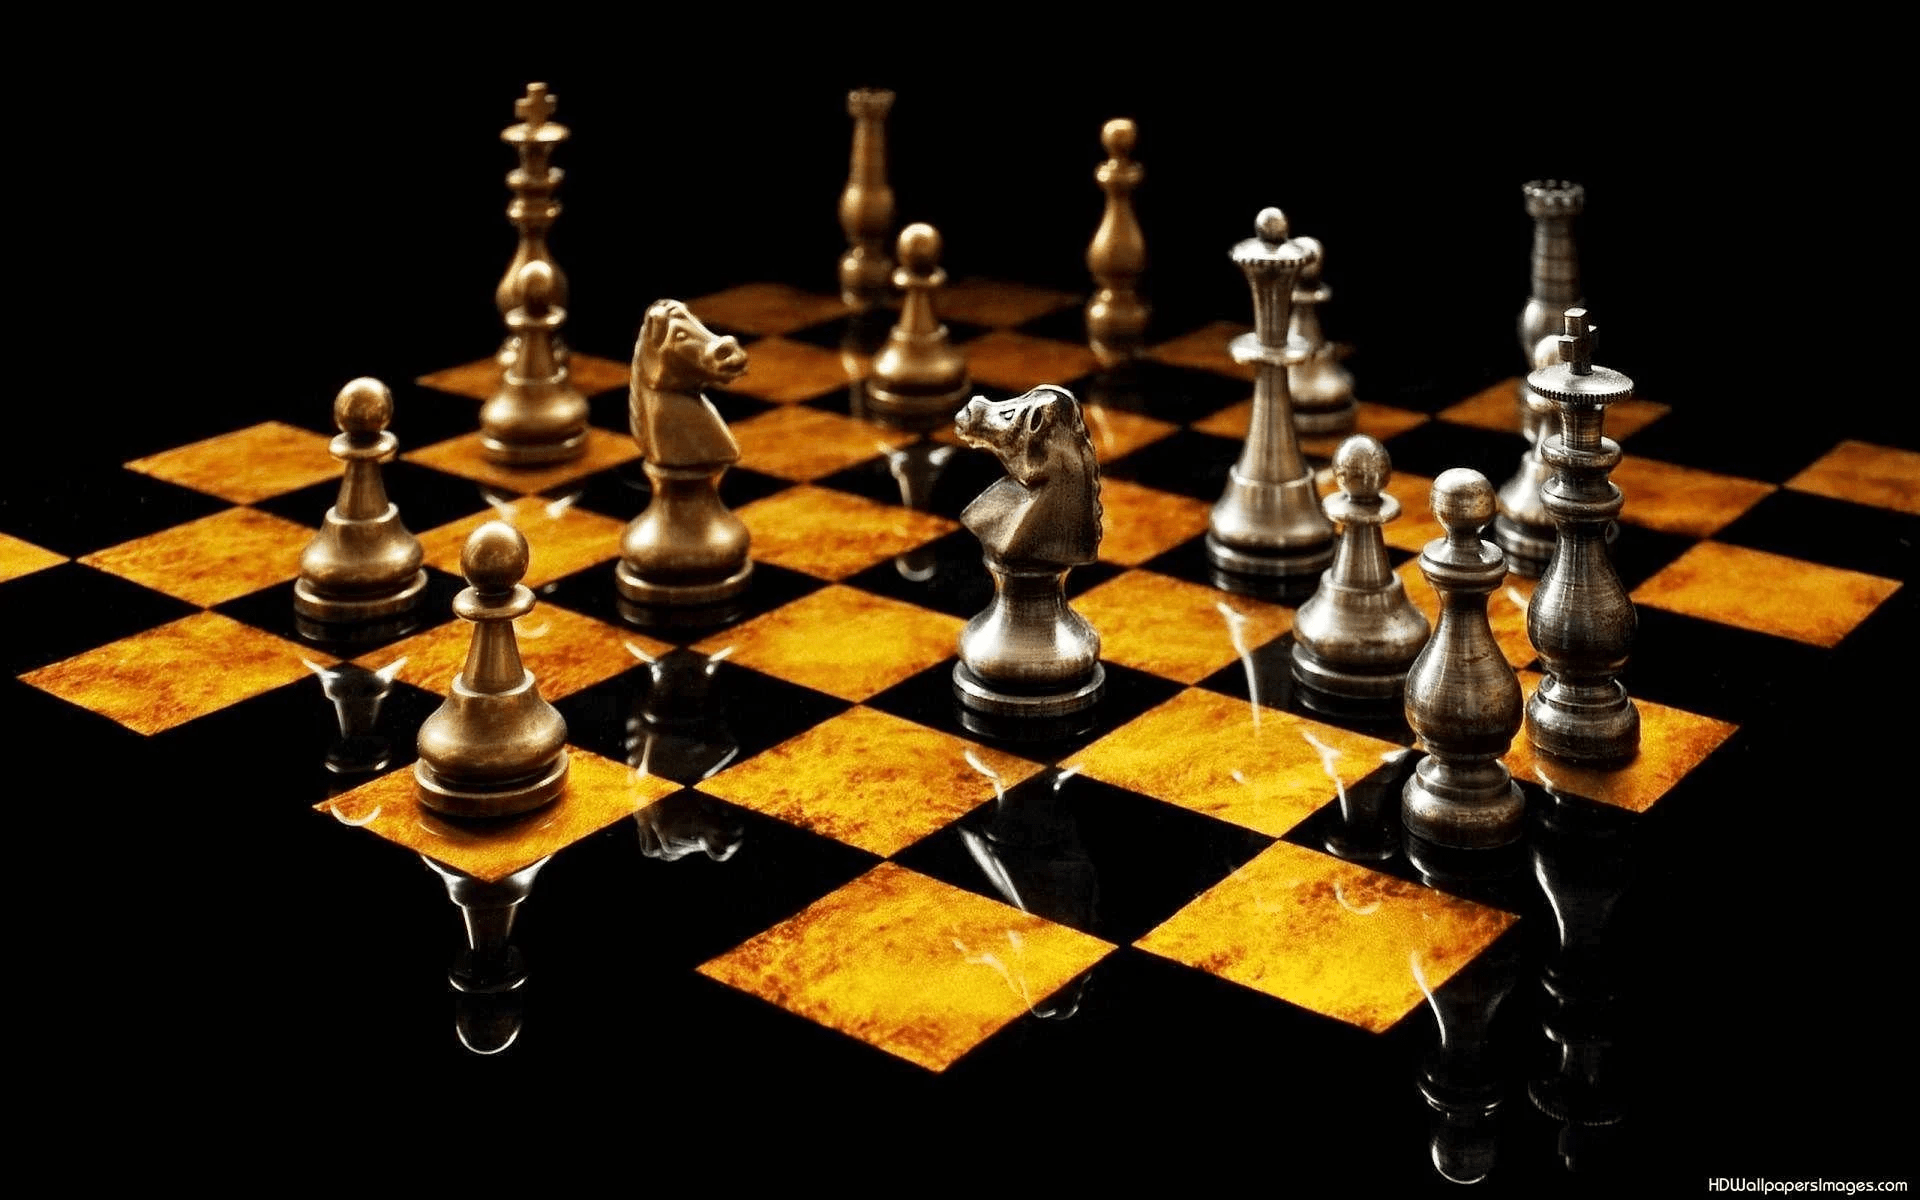 My 4k Pc wallpaper - Chess Forums 